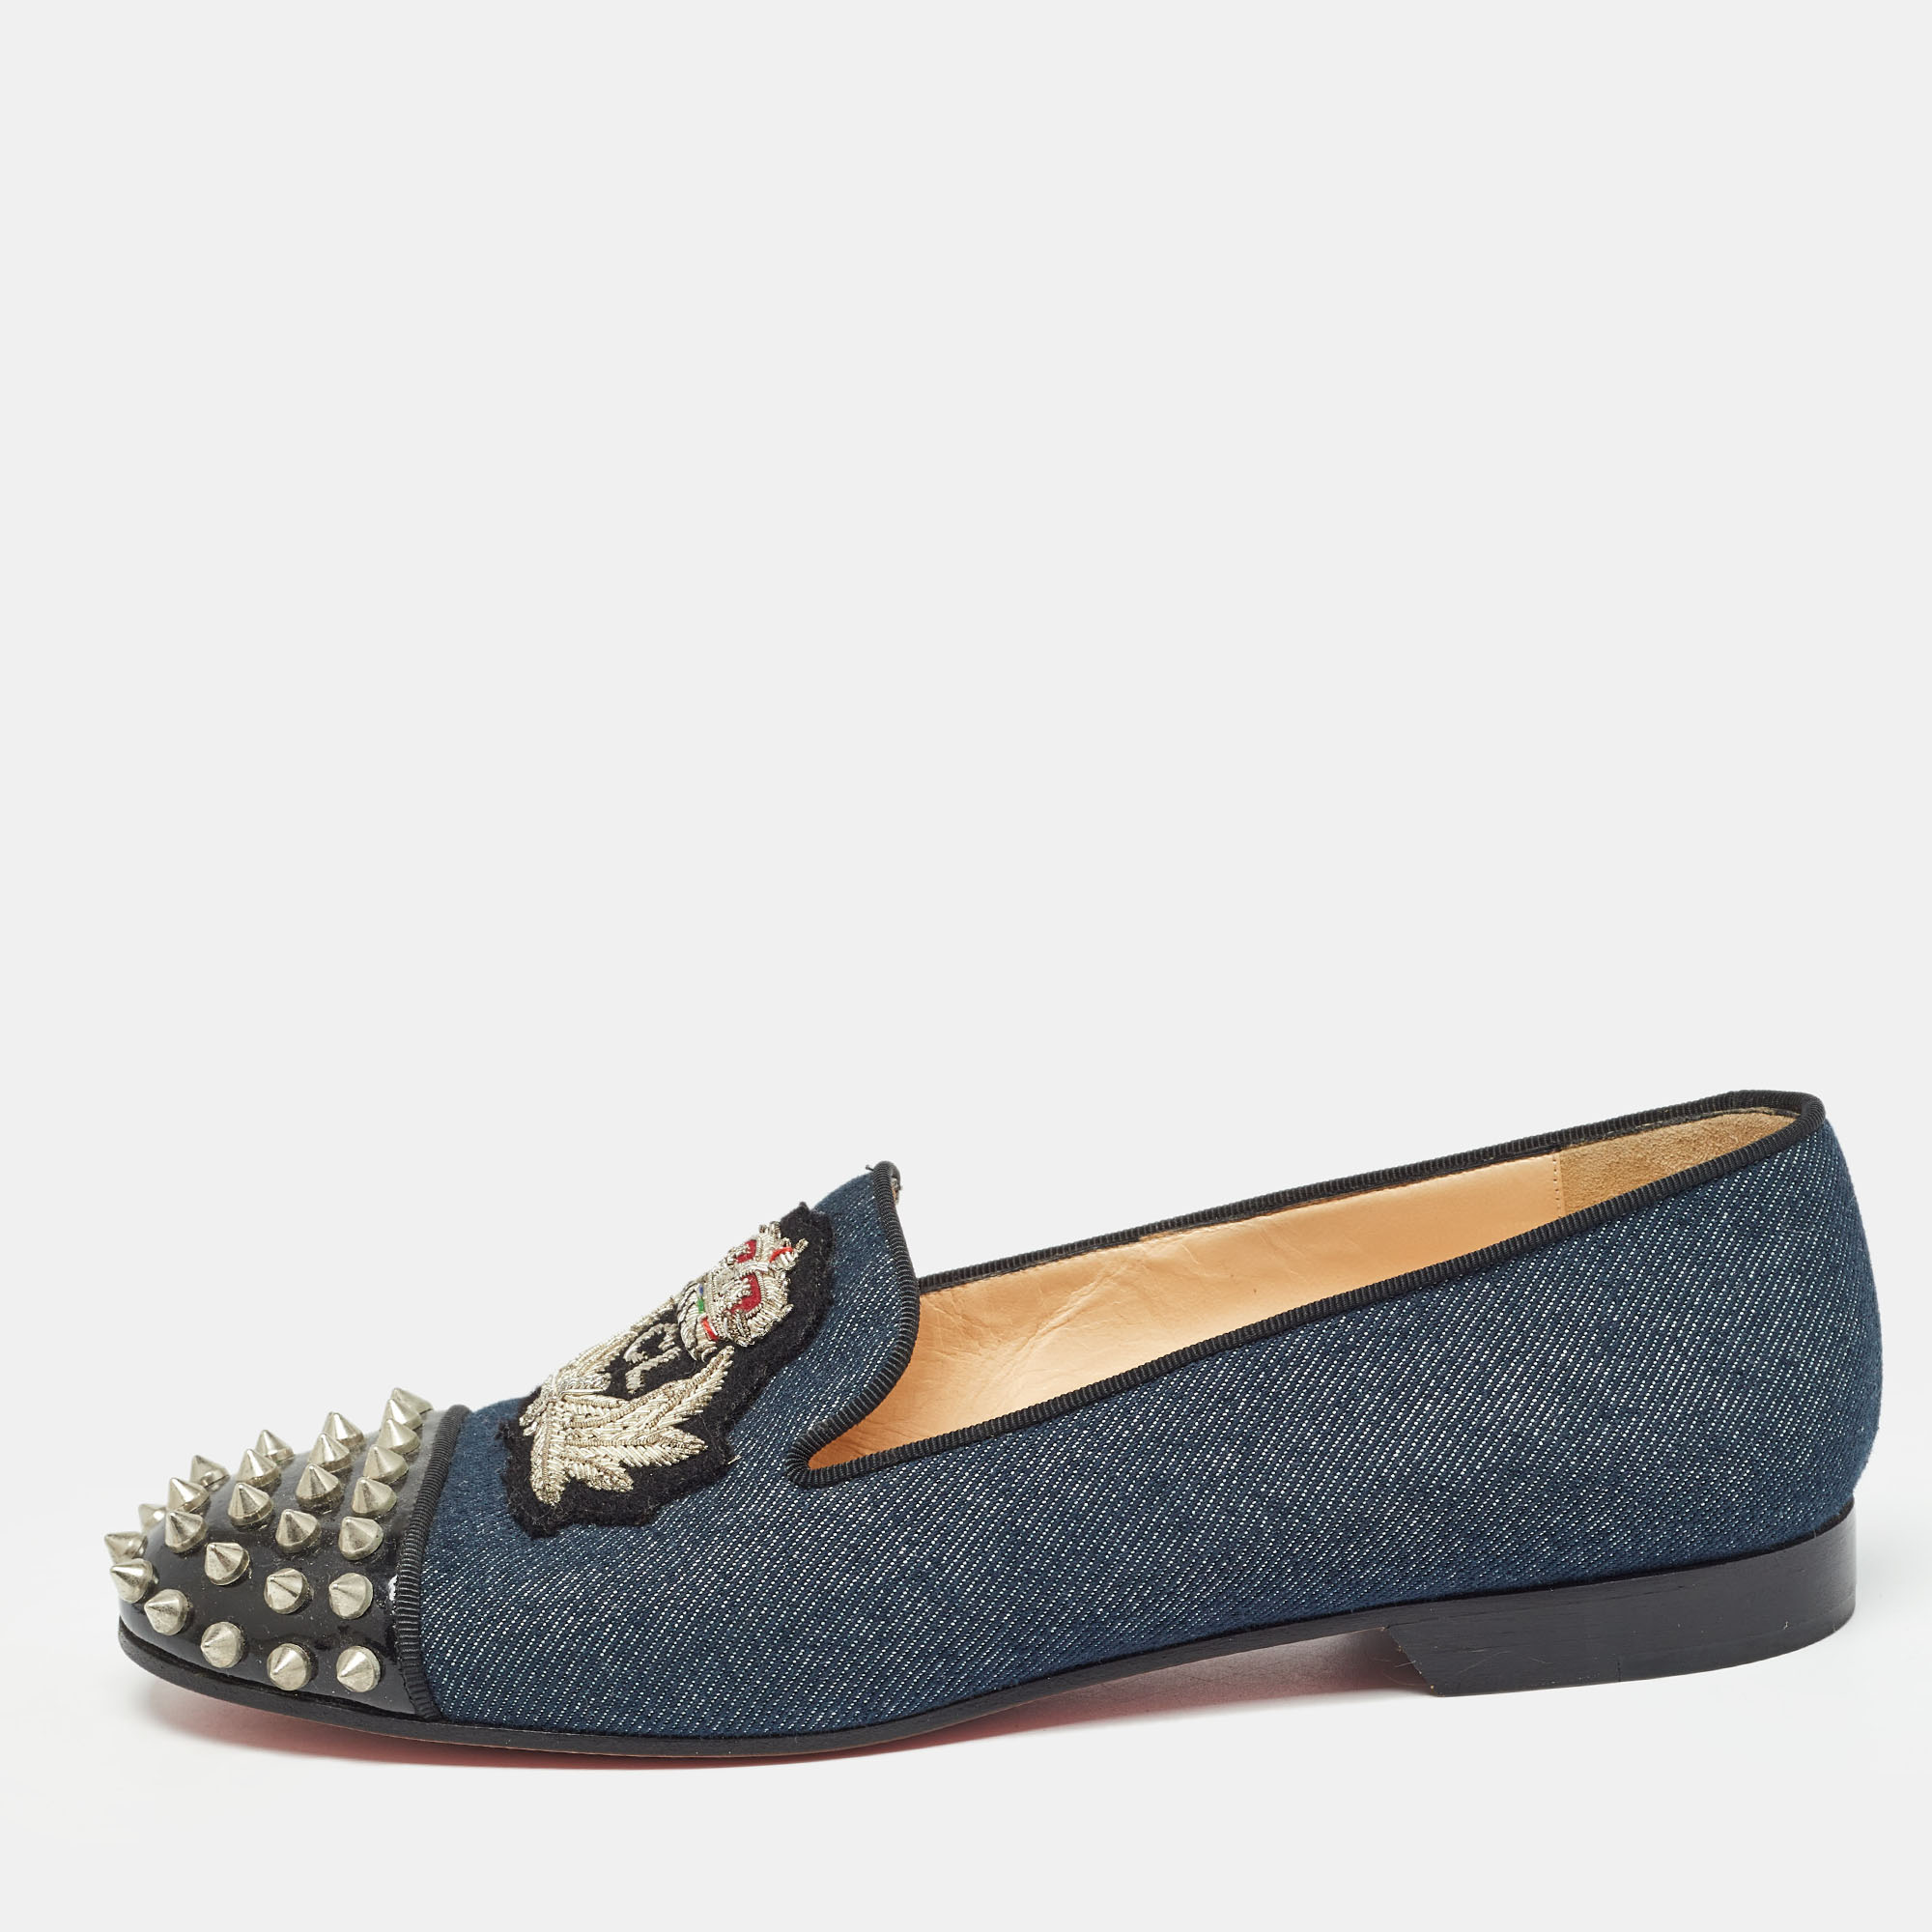 Pre-owned Christian Louboutin Blue Denim Spike Smoking Slippers Size 38.5